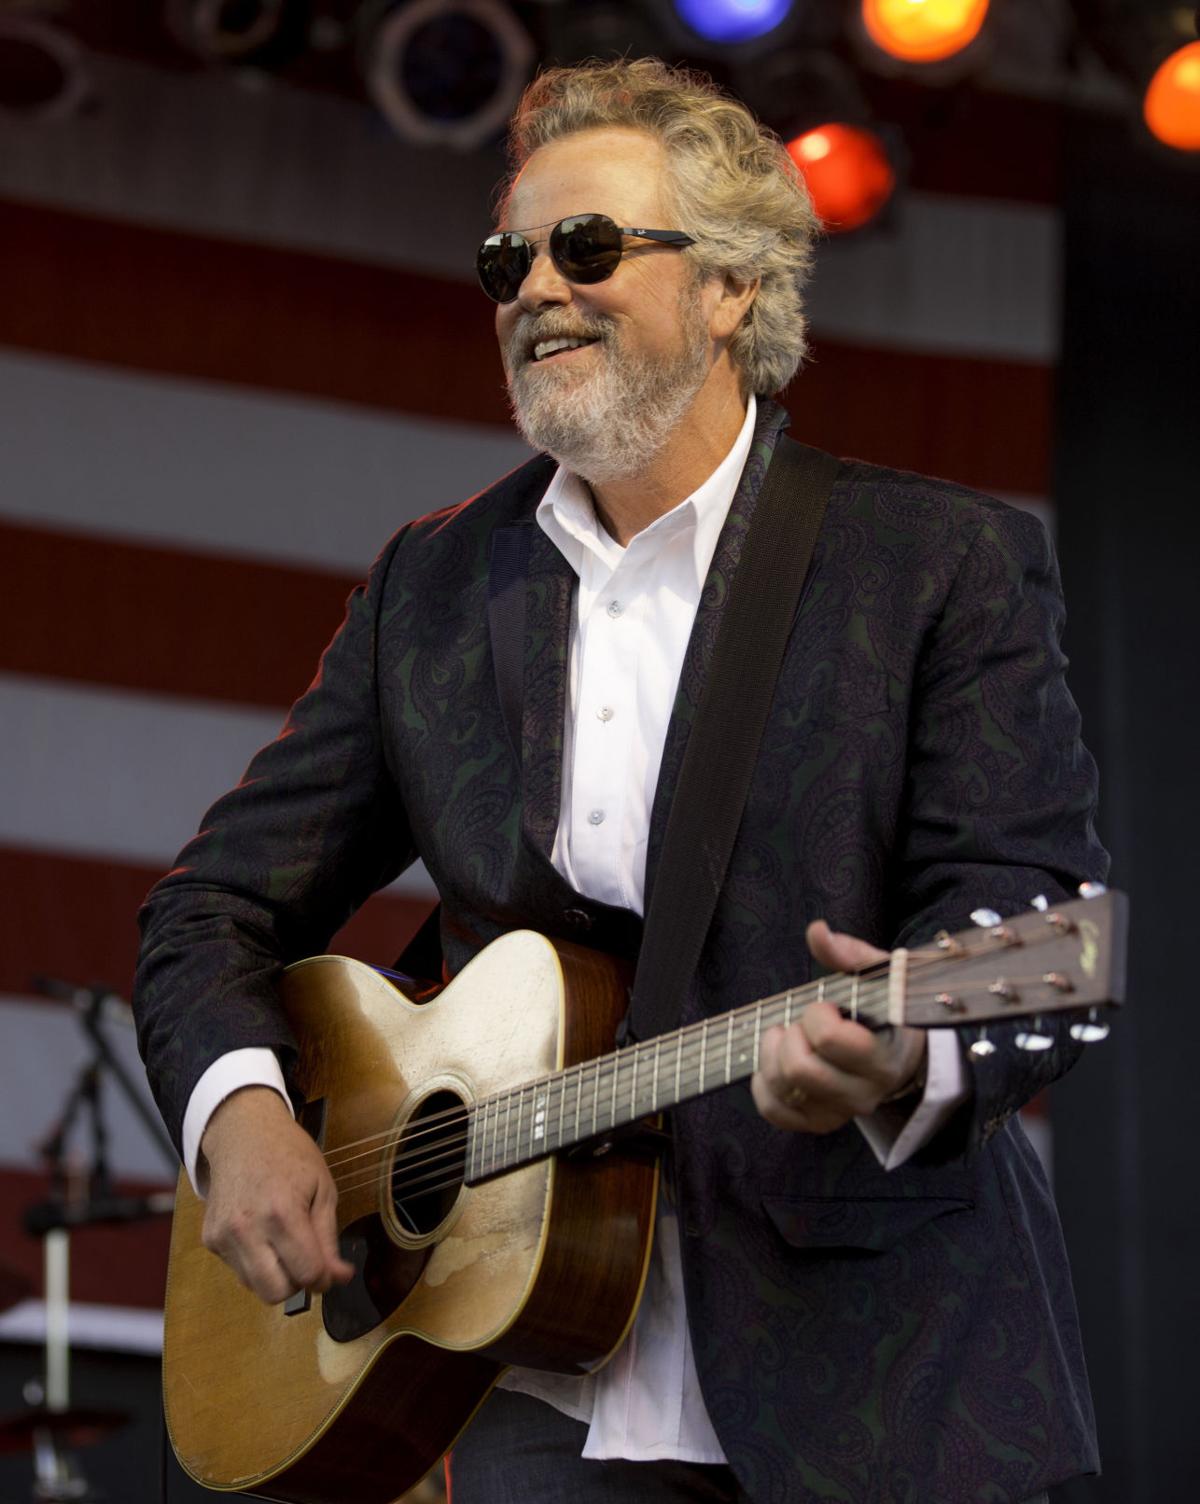 Presidential enthusiast Robert Earl Keen excited to play A&M event